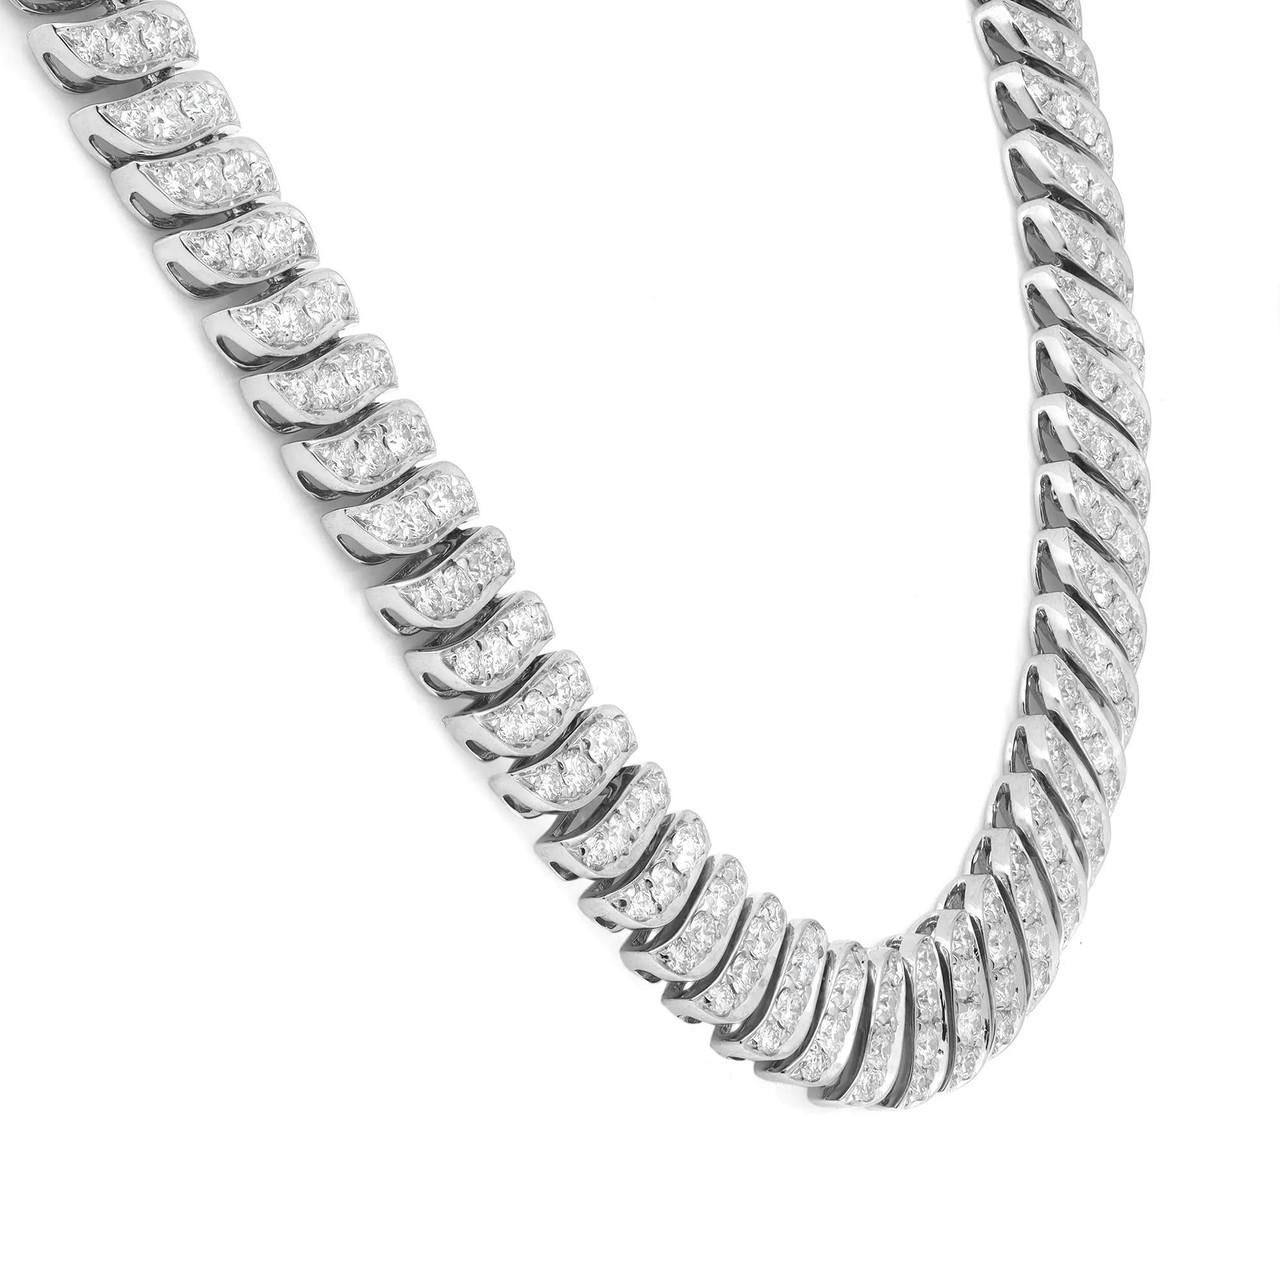 Introducing the audaciously classic 8.33 Carat Round Cut Diamond Necklace in 18K White Gold. This statement piece is designed to stand out and captivate attention. Crafted with meticulous care, this necklace showcases a timeless beauty that she will